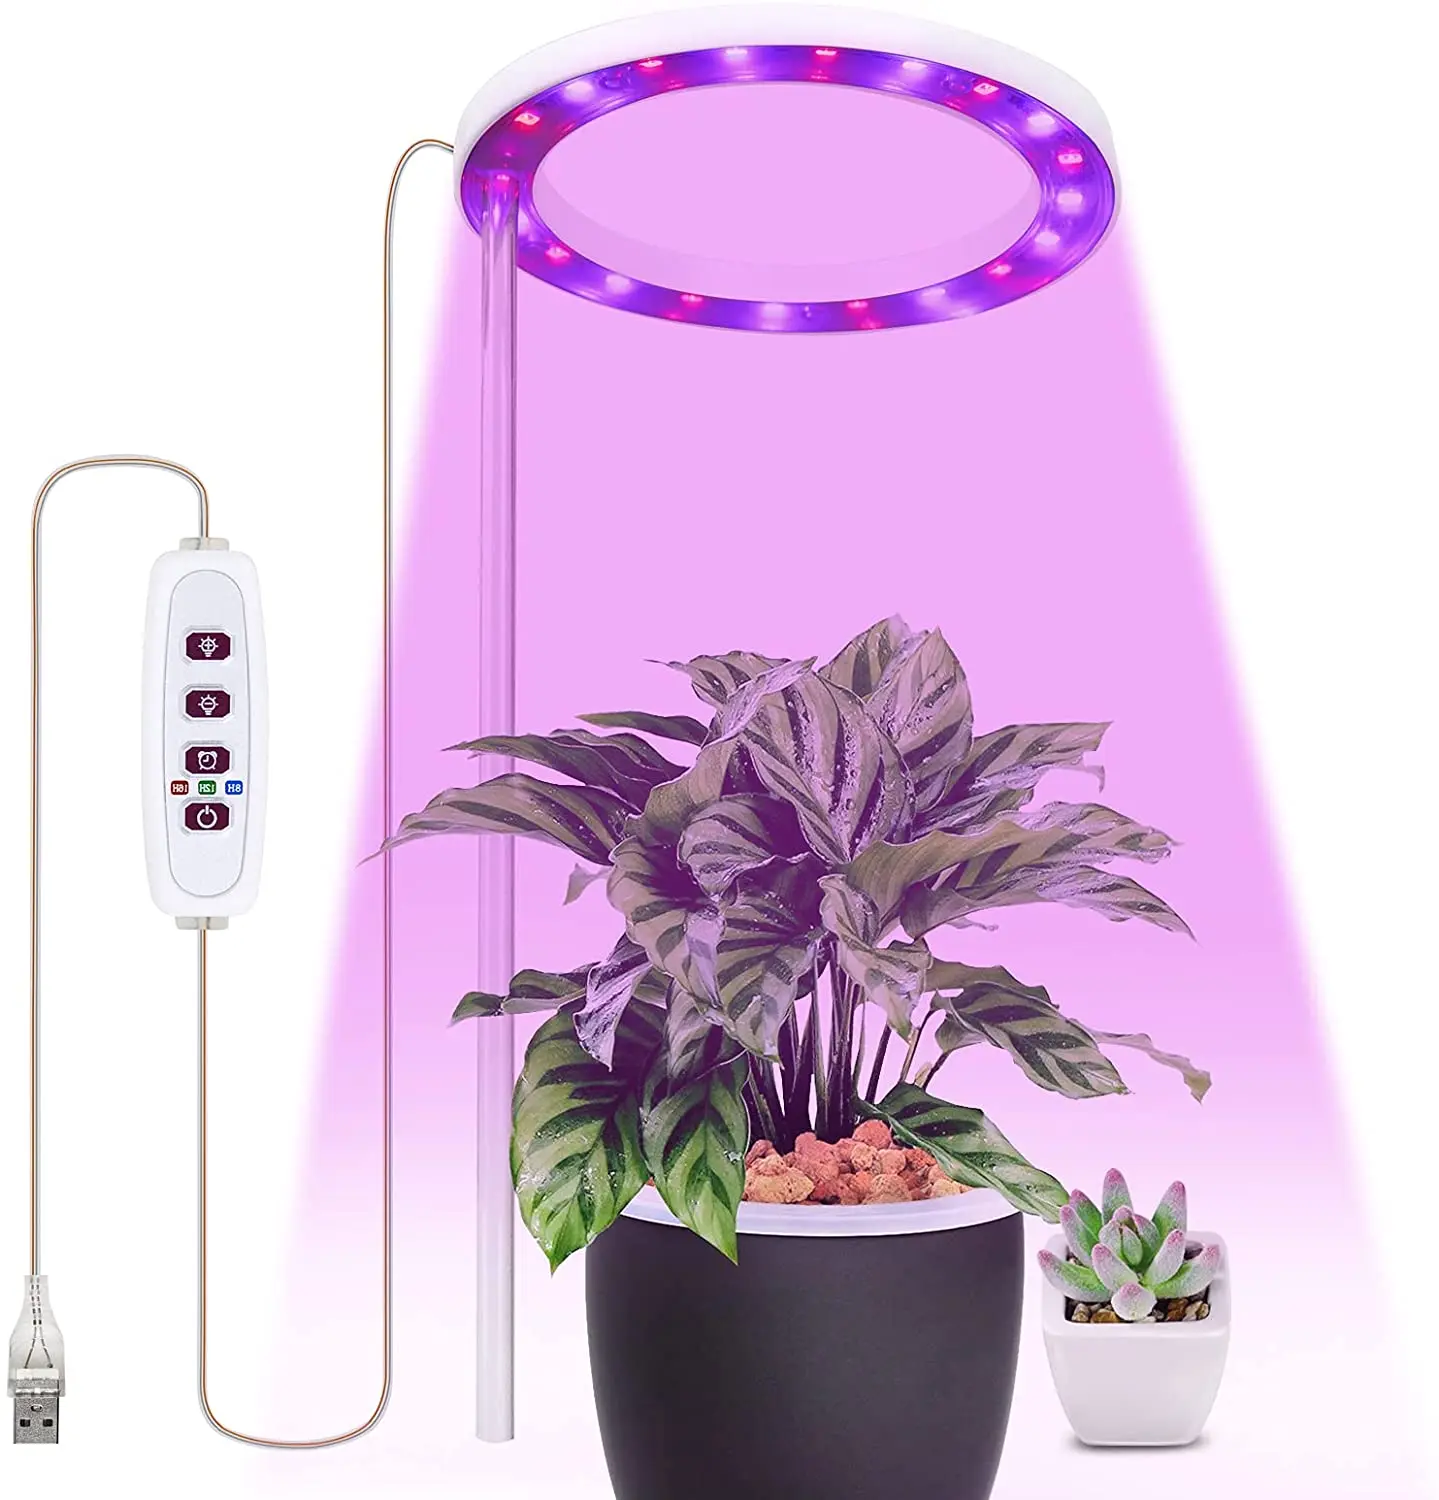 Hijgend samenzwering conjunctie Single Ring Full Spectrum Led Grow Lamp Usb Intelligent Dimmer Timer Pink  Color Led Grow Light For Indoor Plants - Buy Grow Lamp,Led Grow Light For  Indoor Plants,Led Grow Light Product on